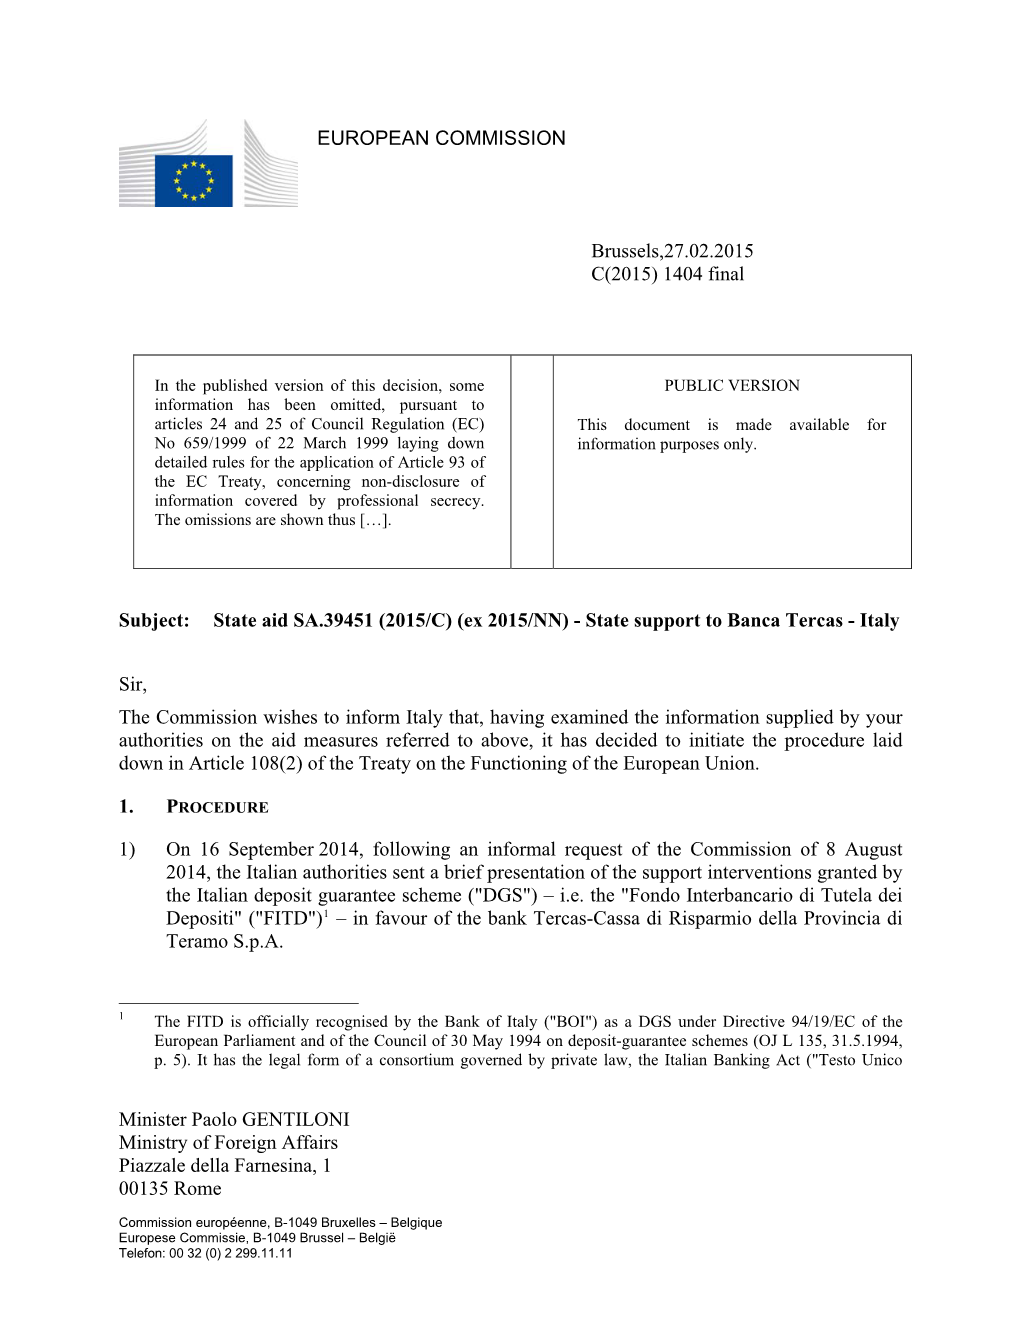 State Aid SA.39451 (2015/C) (Ex 2015/NN) - State Support to Banca Tercas - Italy